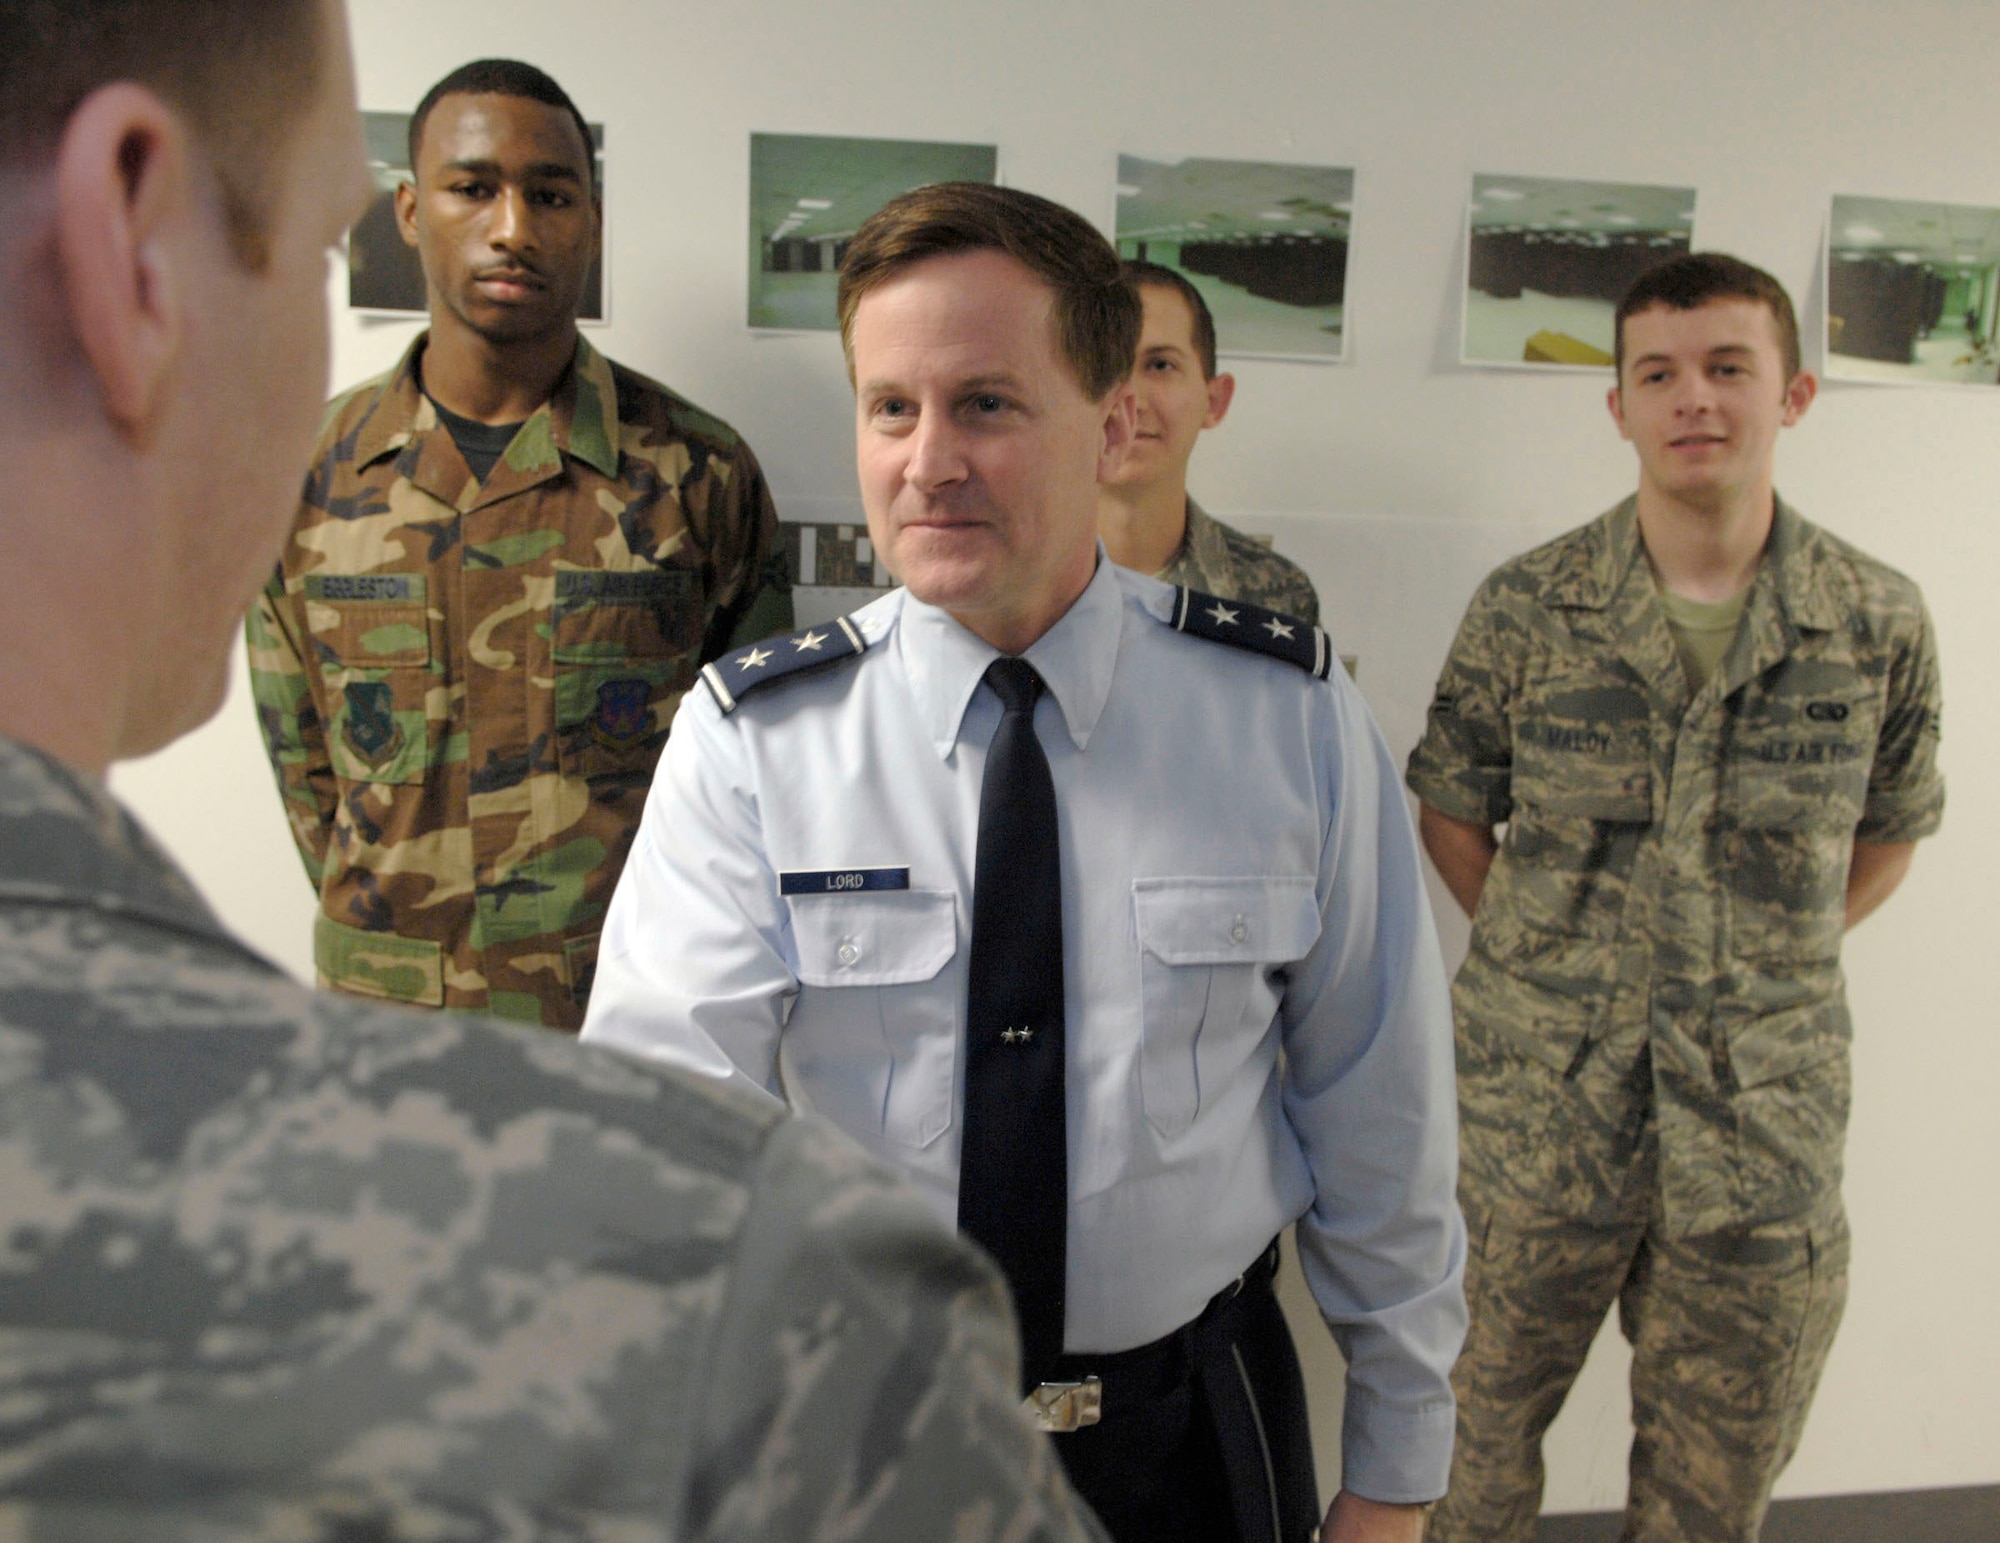 Maj. Gen. William T. Lord greets Staff Sgt. Christopher Newbill, Senior Airman Sean Manning, and Airmen 1st Class Taji Eggleston and Brenden Maloy May 1at Andrews Air Force Base, Md. The Airmen helped install the Air Force's newest Area Processing Center there. The APC consolidates e-mail, file sharing and many other data and information services for more than 160,000 Air Force workers. General Lord is the Air Force Cyber Command provisional commander. (U.S. Air Force photo/Senior Airman Steven Doty)